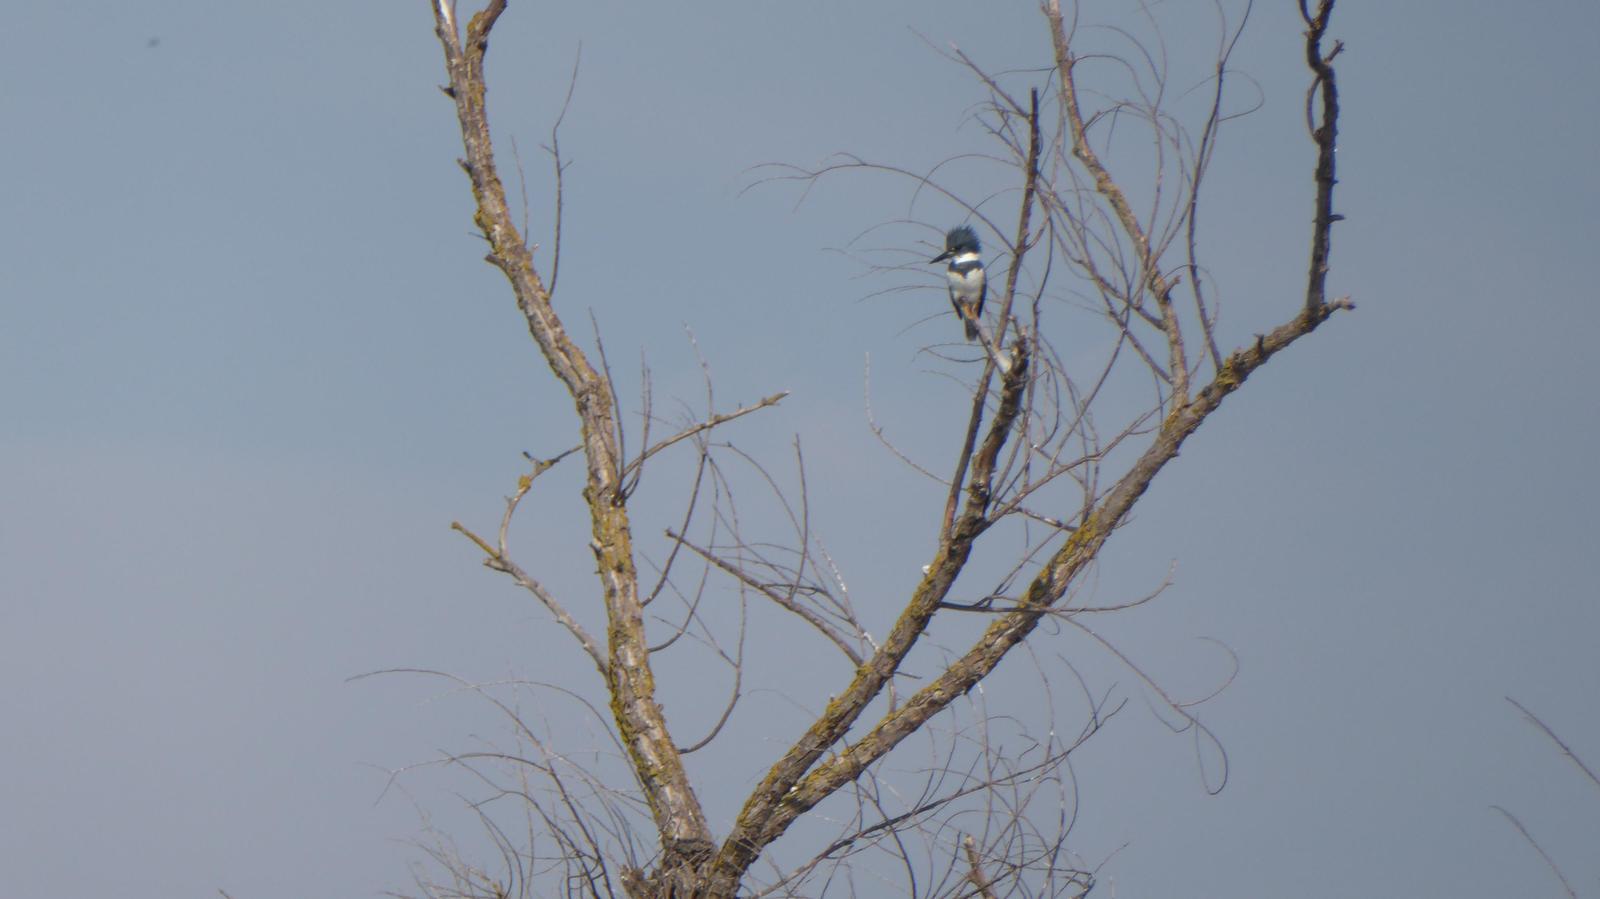 Belted Kingfisher Photo by Daliel Leite